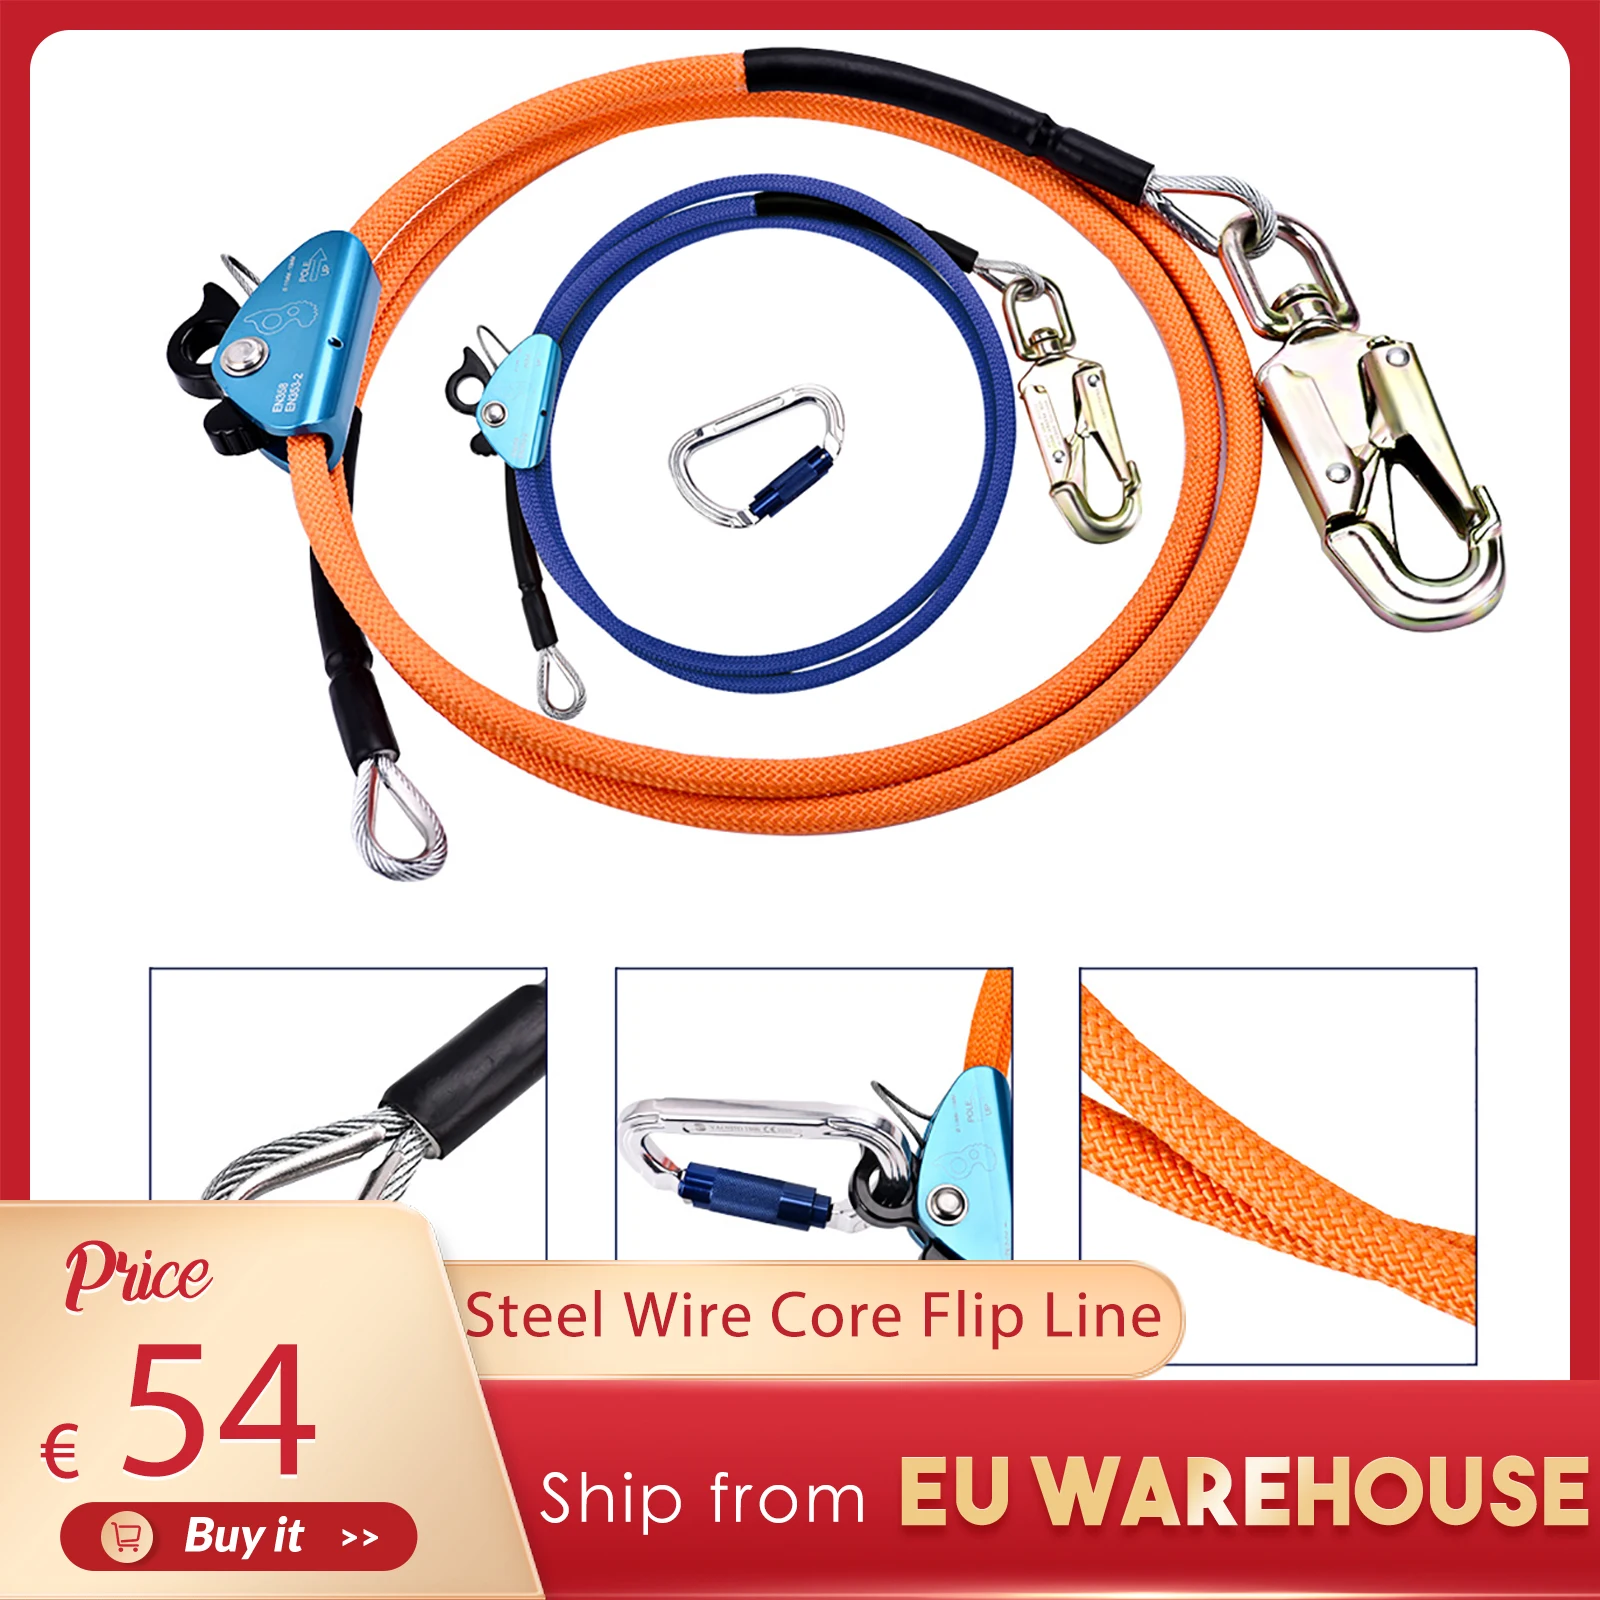 Wire-Core Flip Line Kit with Triple Lock Carabiner, Adjustable Lanyard, Low Stretch for Fall Safeguard Tree Inspection Climber